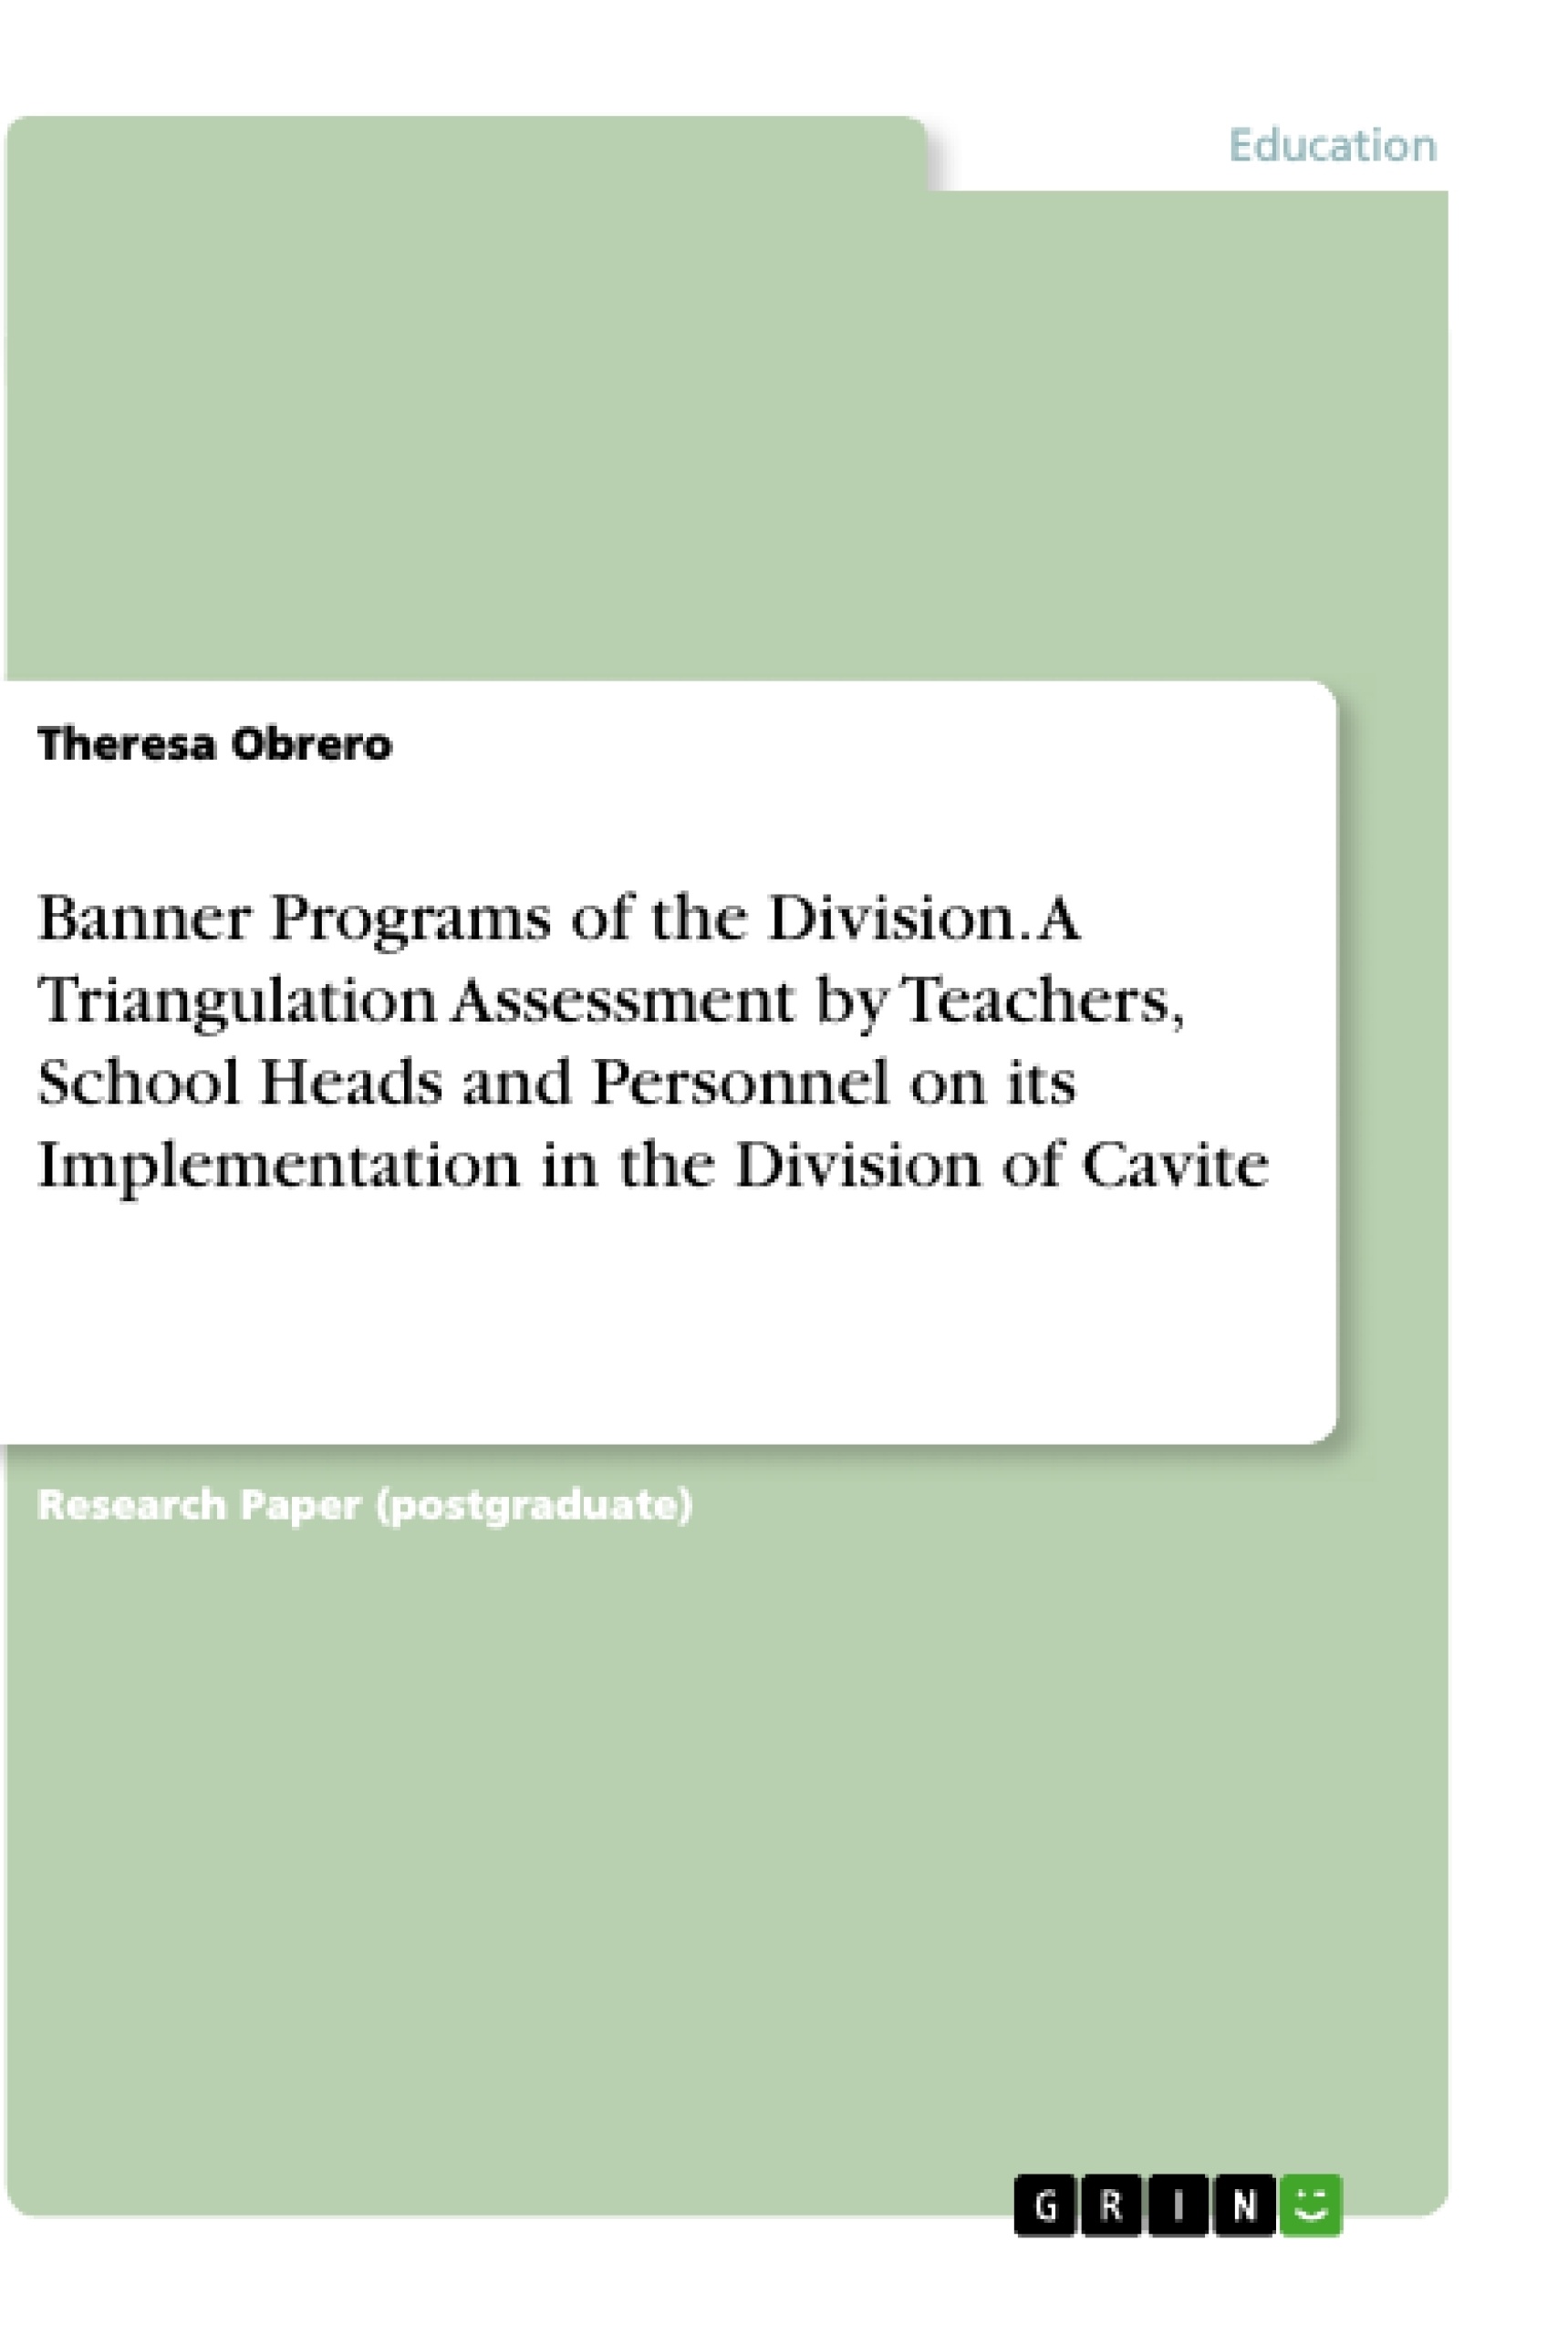 Title: Banner Programs of the Division. A Triangulation Assessment by Teachers, School Heads and Personnel on its Implementation in the Division of Cavite